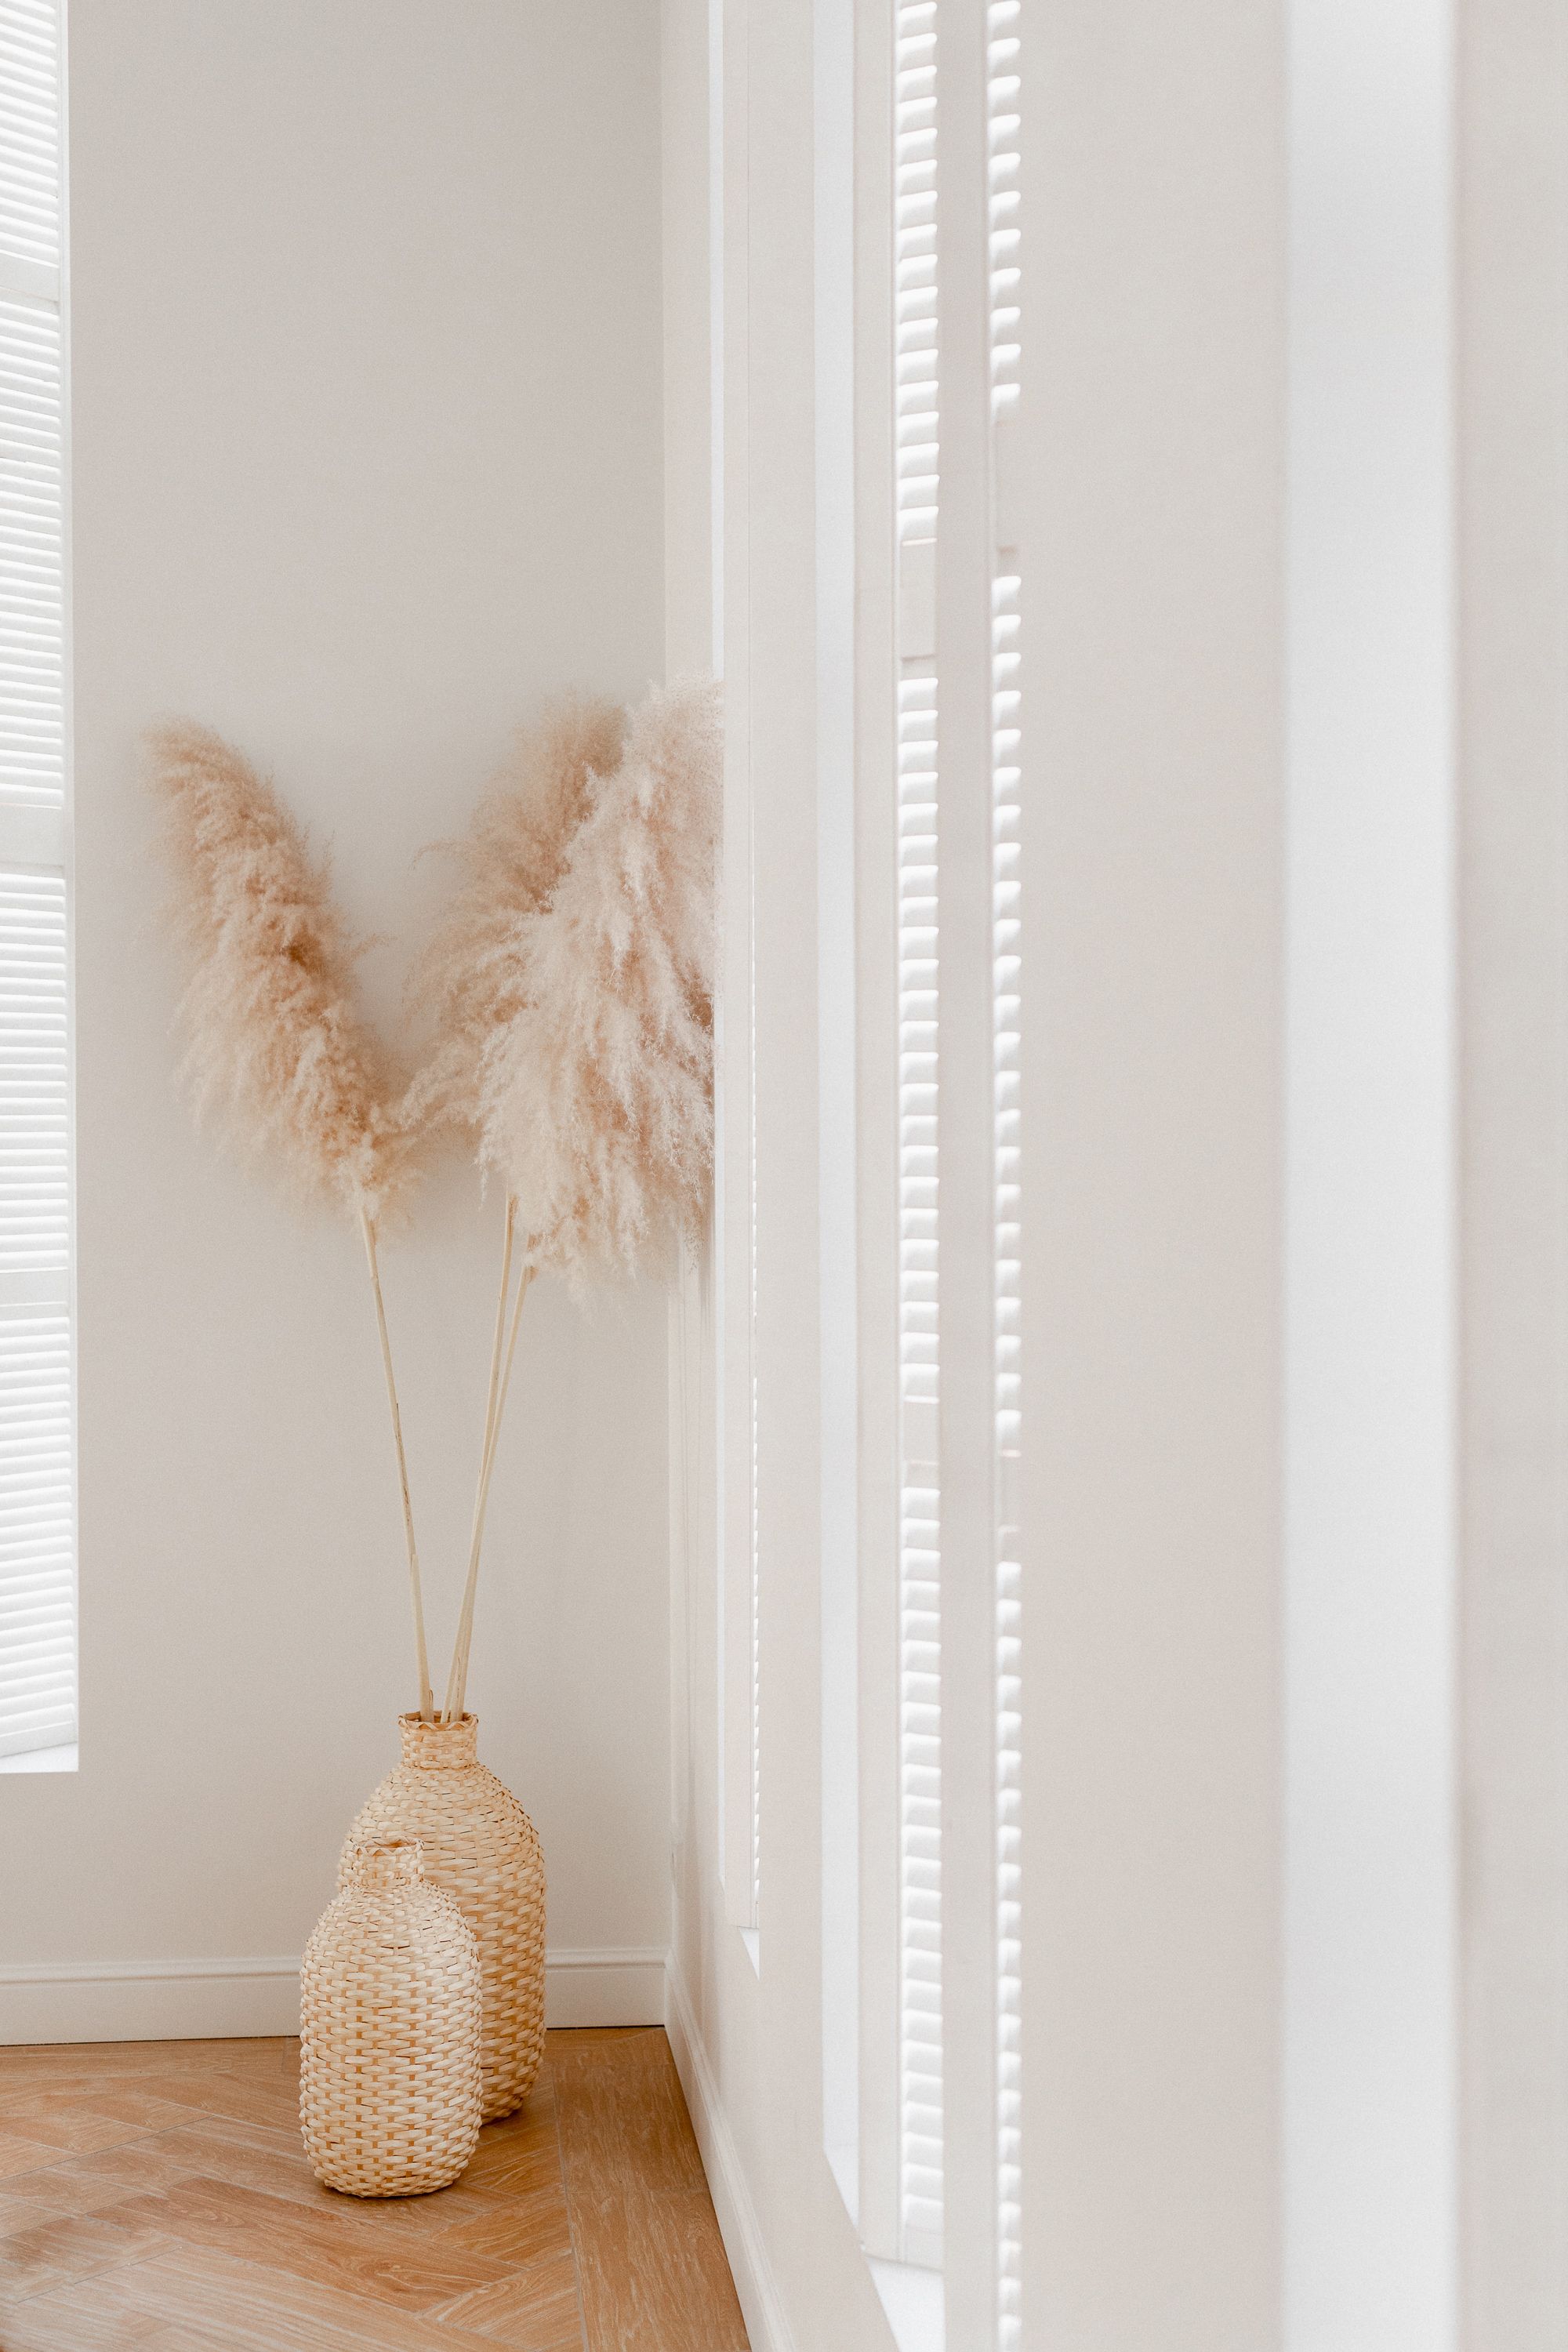 15 Dried Pampas Grass Decor Ideas for Instant Texture and Style